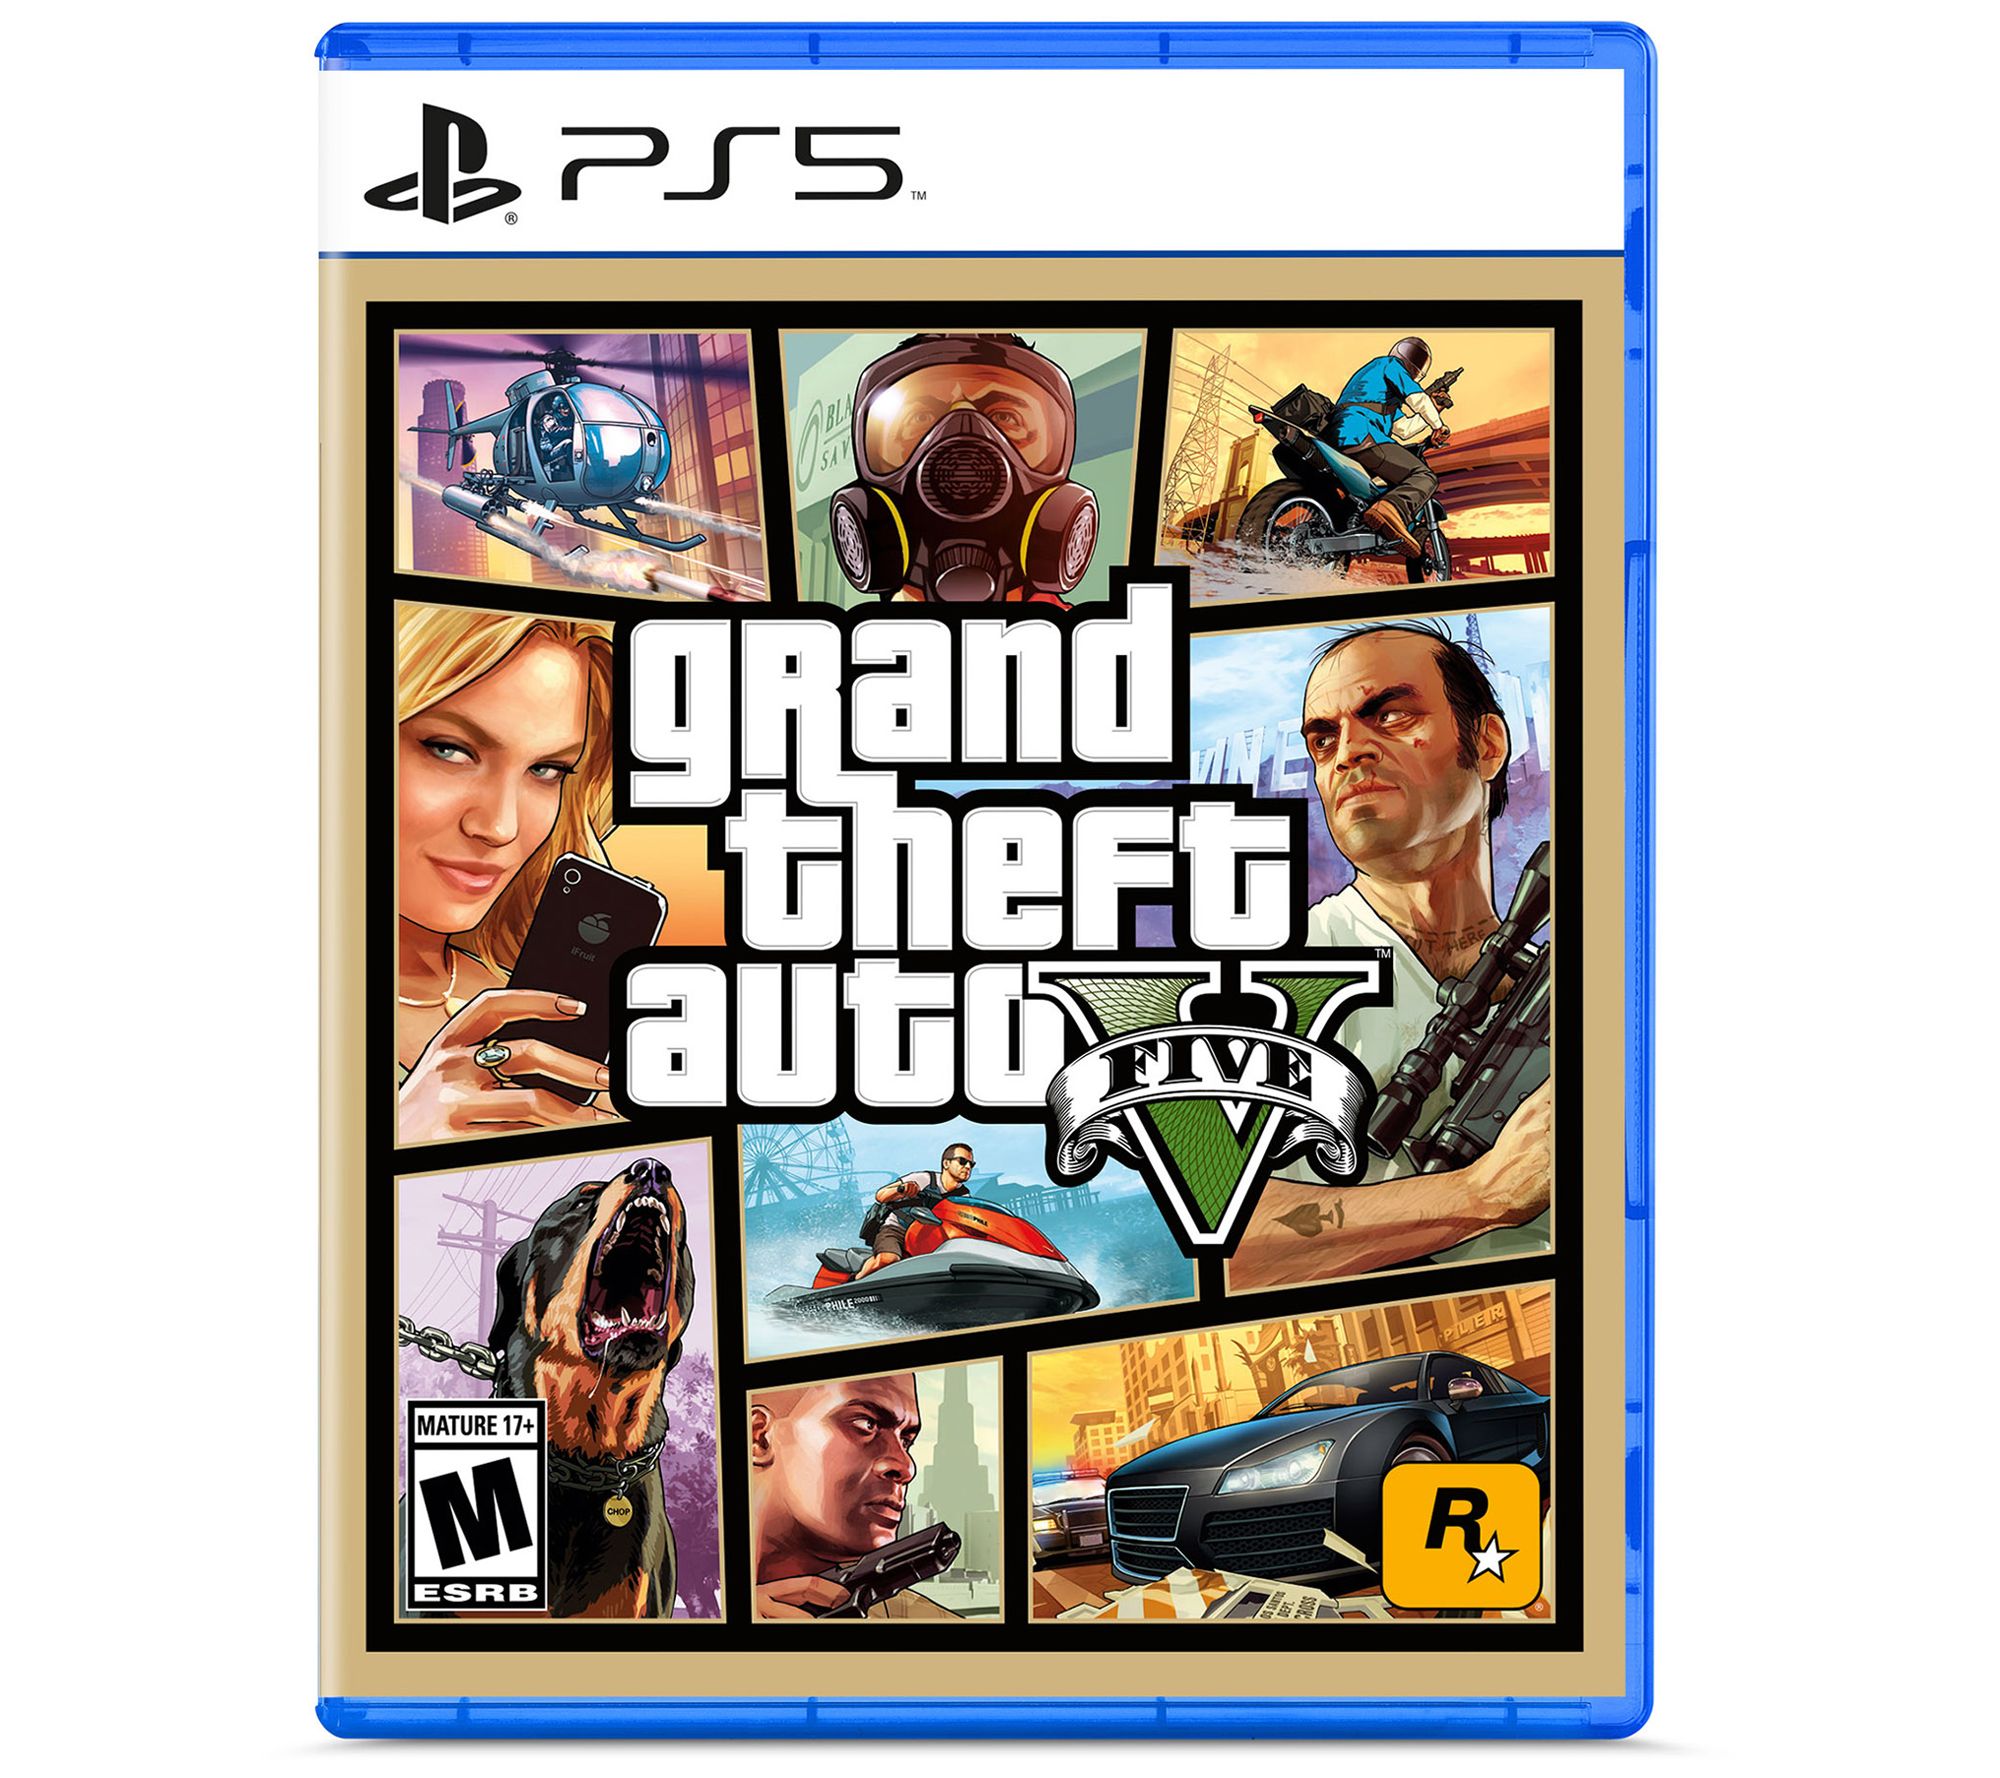 GRAND THEFT AUTO V FIVE GTA 5 PLAYSTATION 4 PS4 VIDEO GAME TESTED